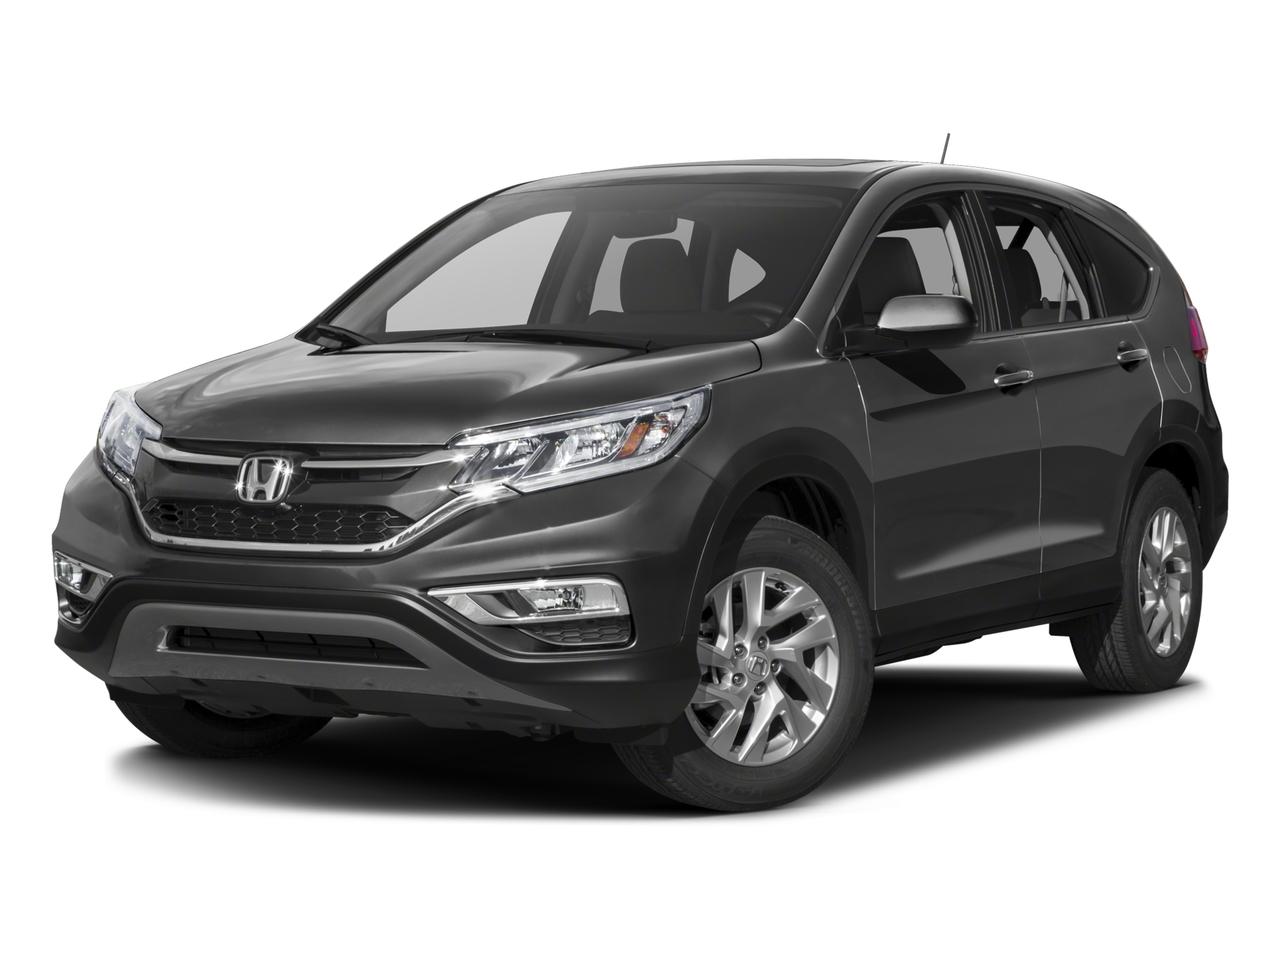 East Haven Honda CRV 2016 Gray Used Suv for Sale CT21012A